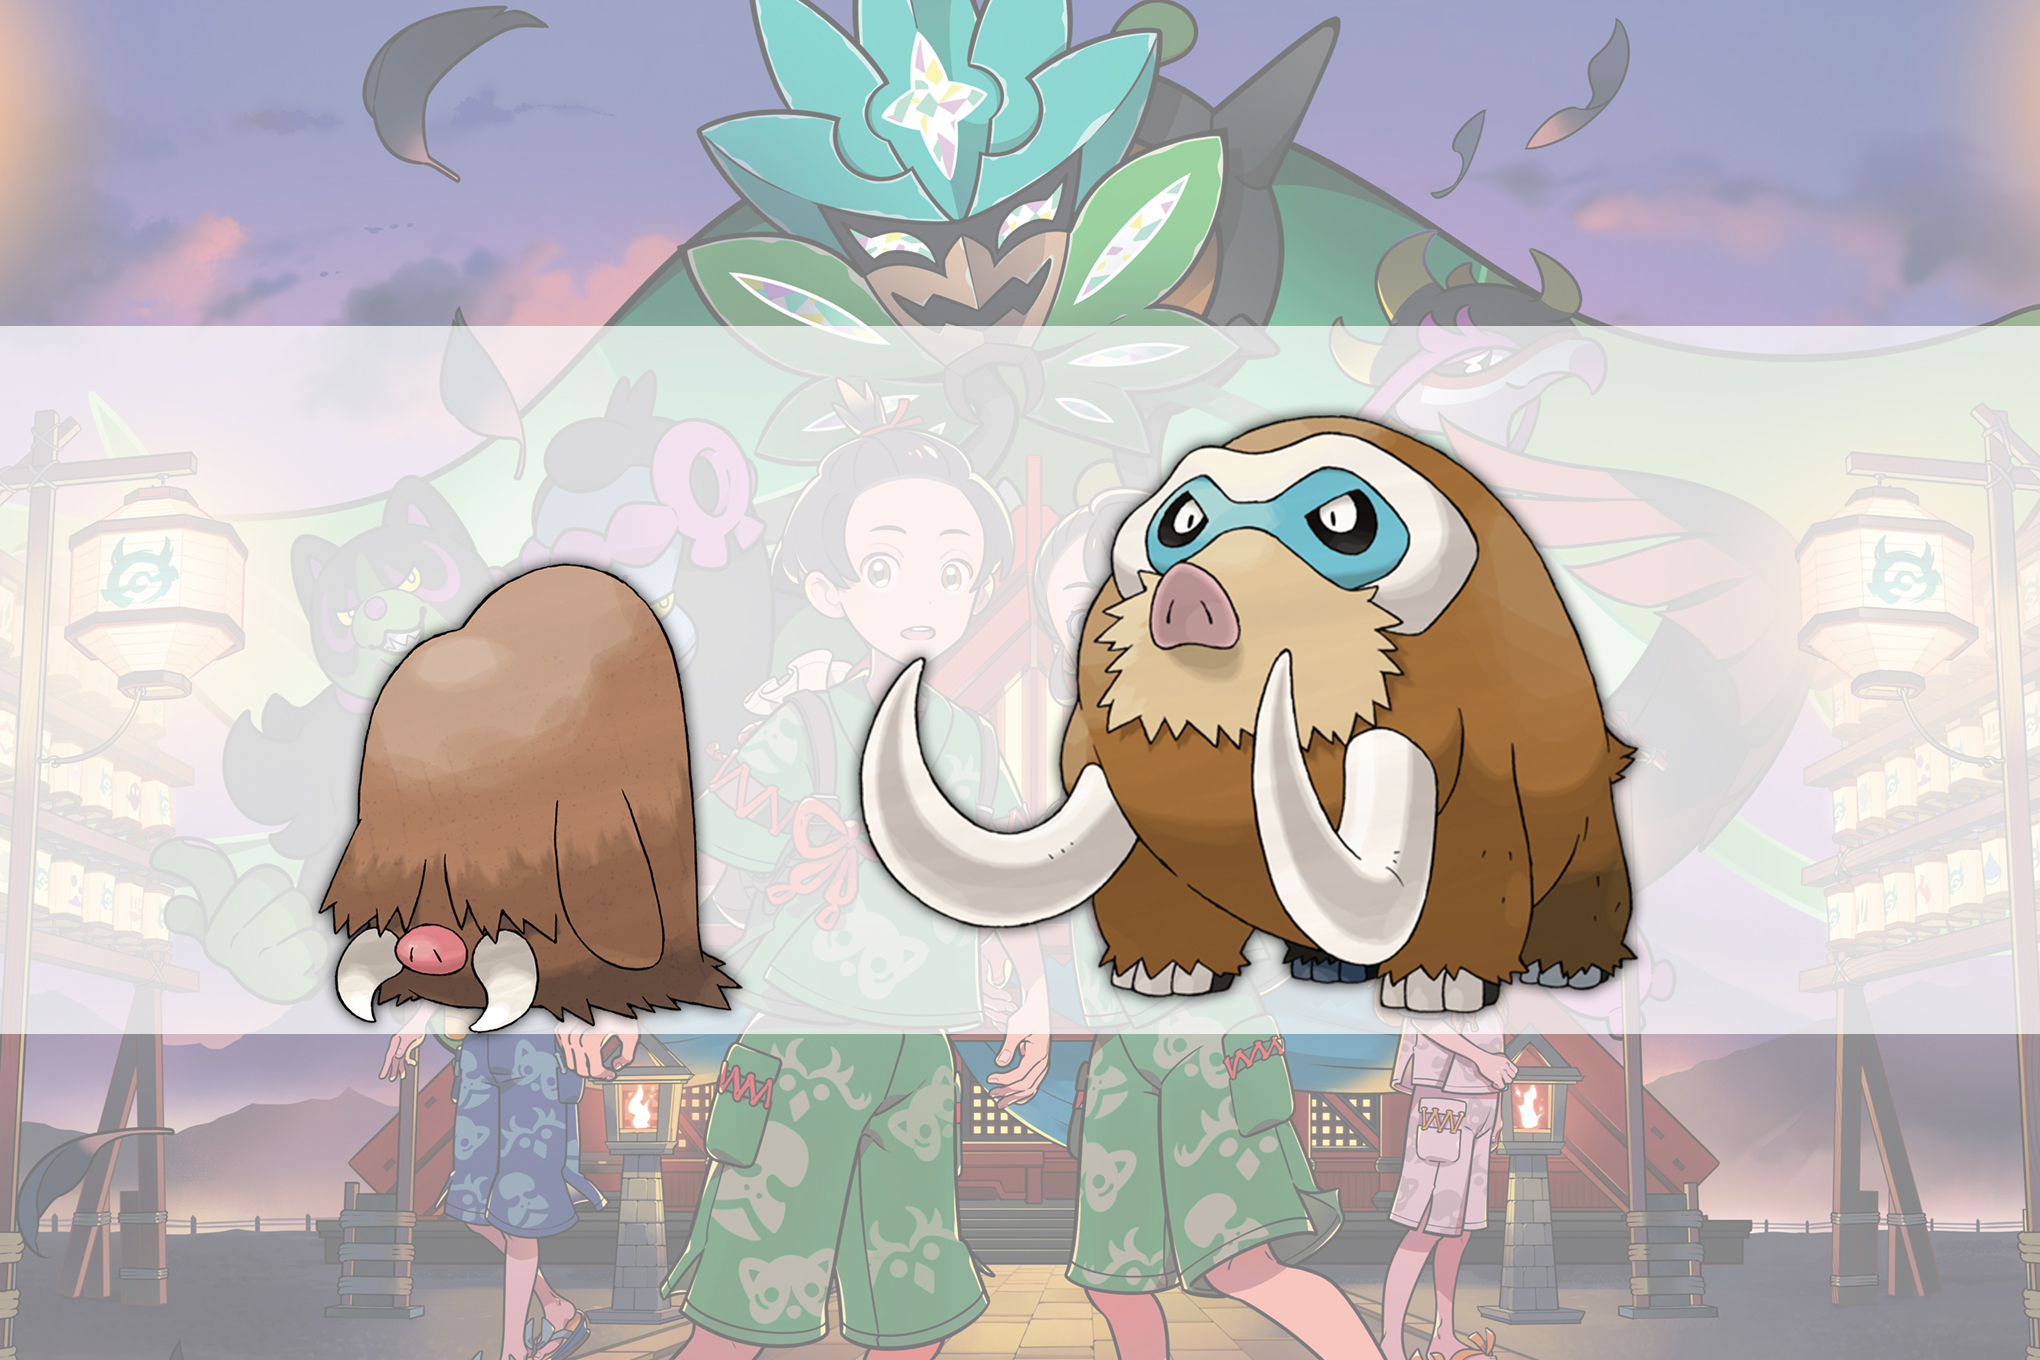 Piloswine and Mamoswine over the key art for The Teal Mask